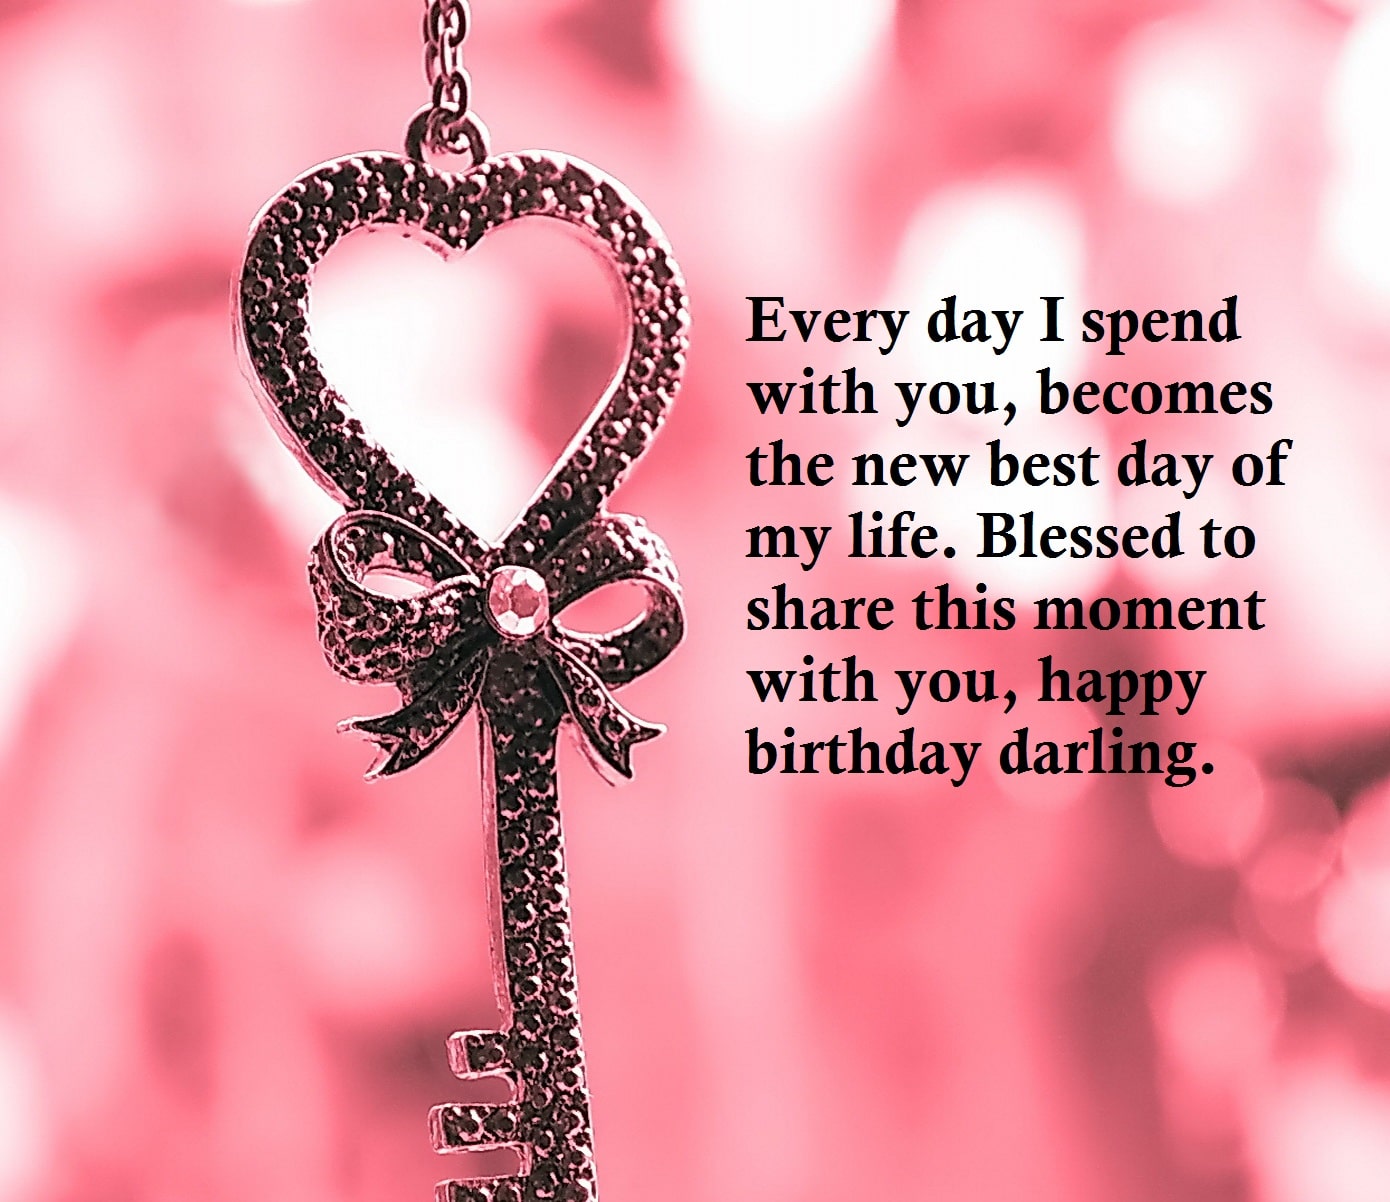 Birthday Wishes Messages For Husband | Best Wishes